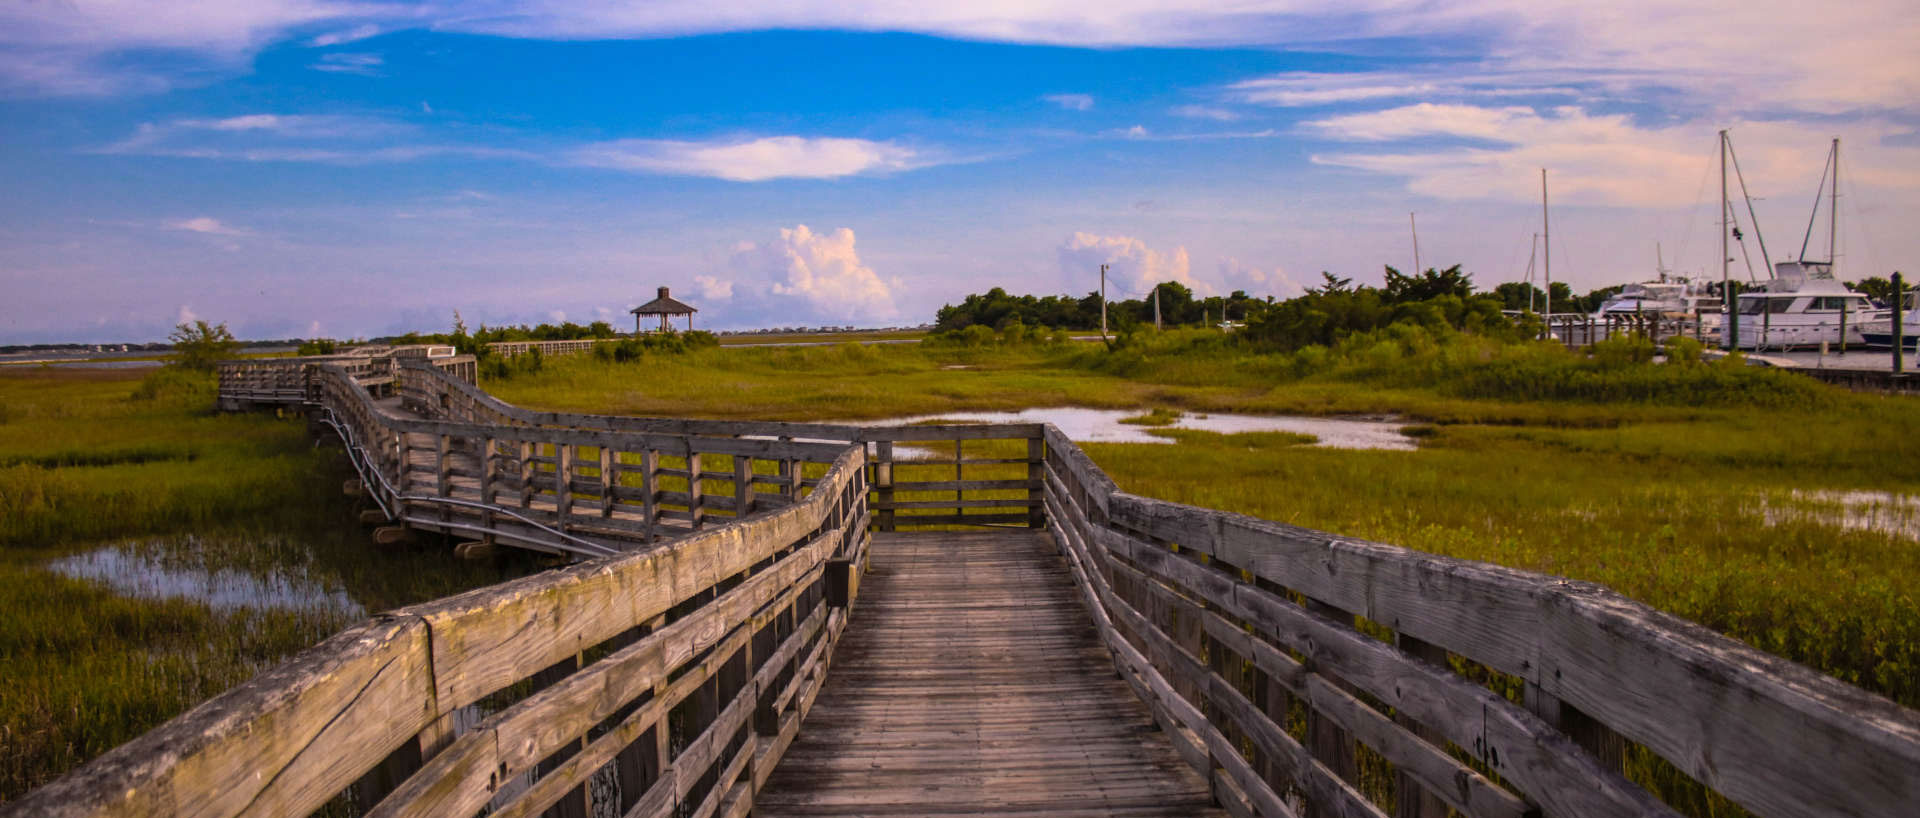 A beautiful, yet rustic wooden bridge leads the path to the skyline above.